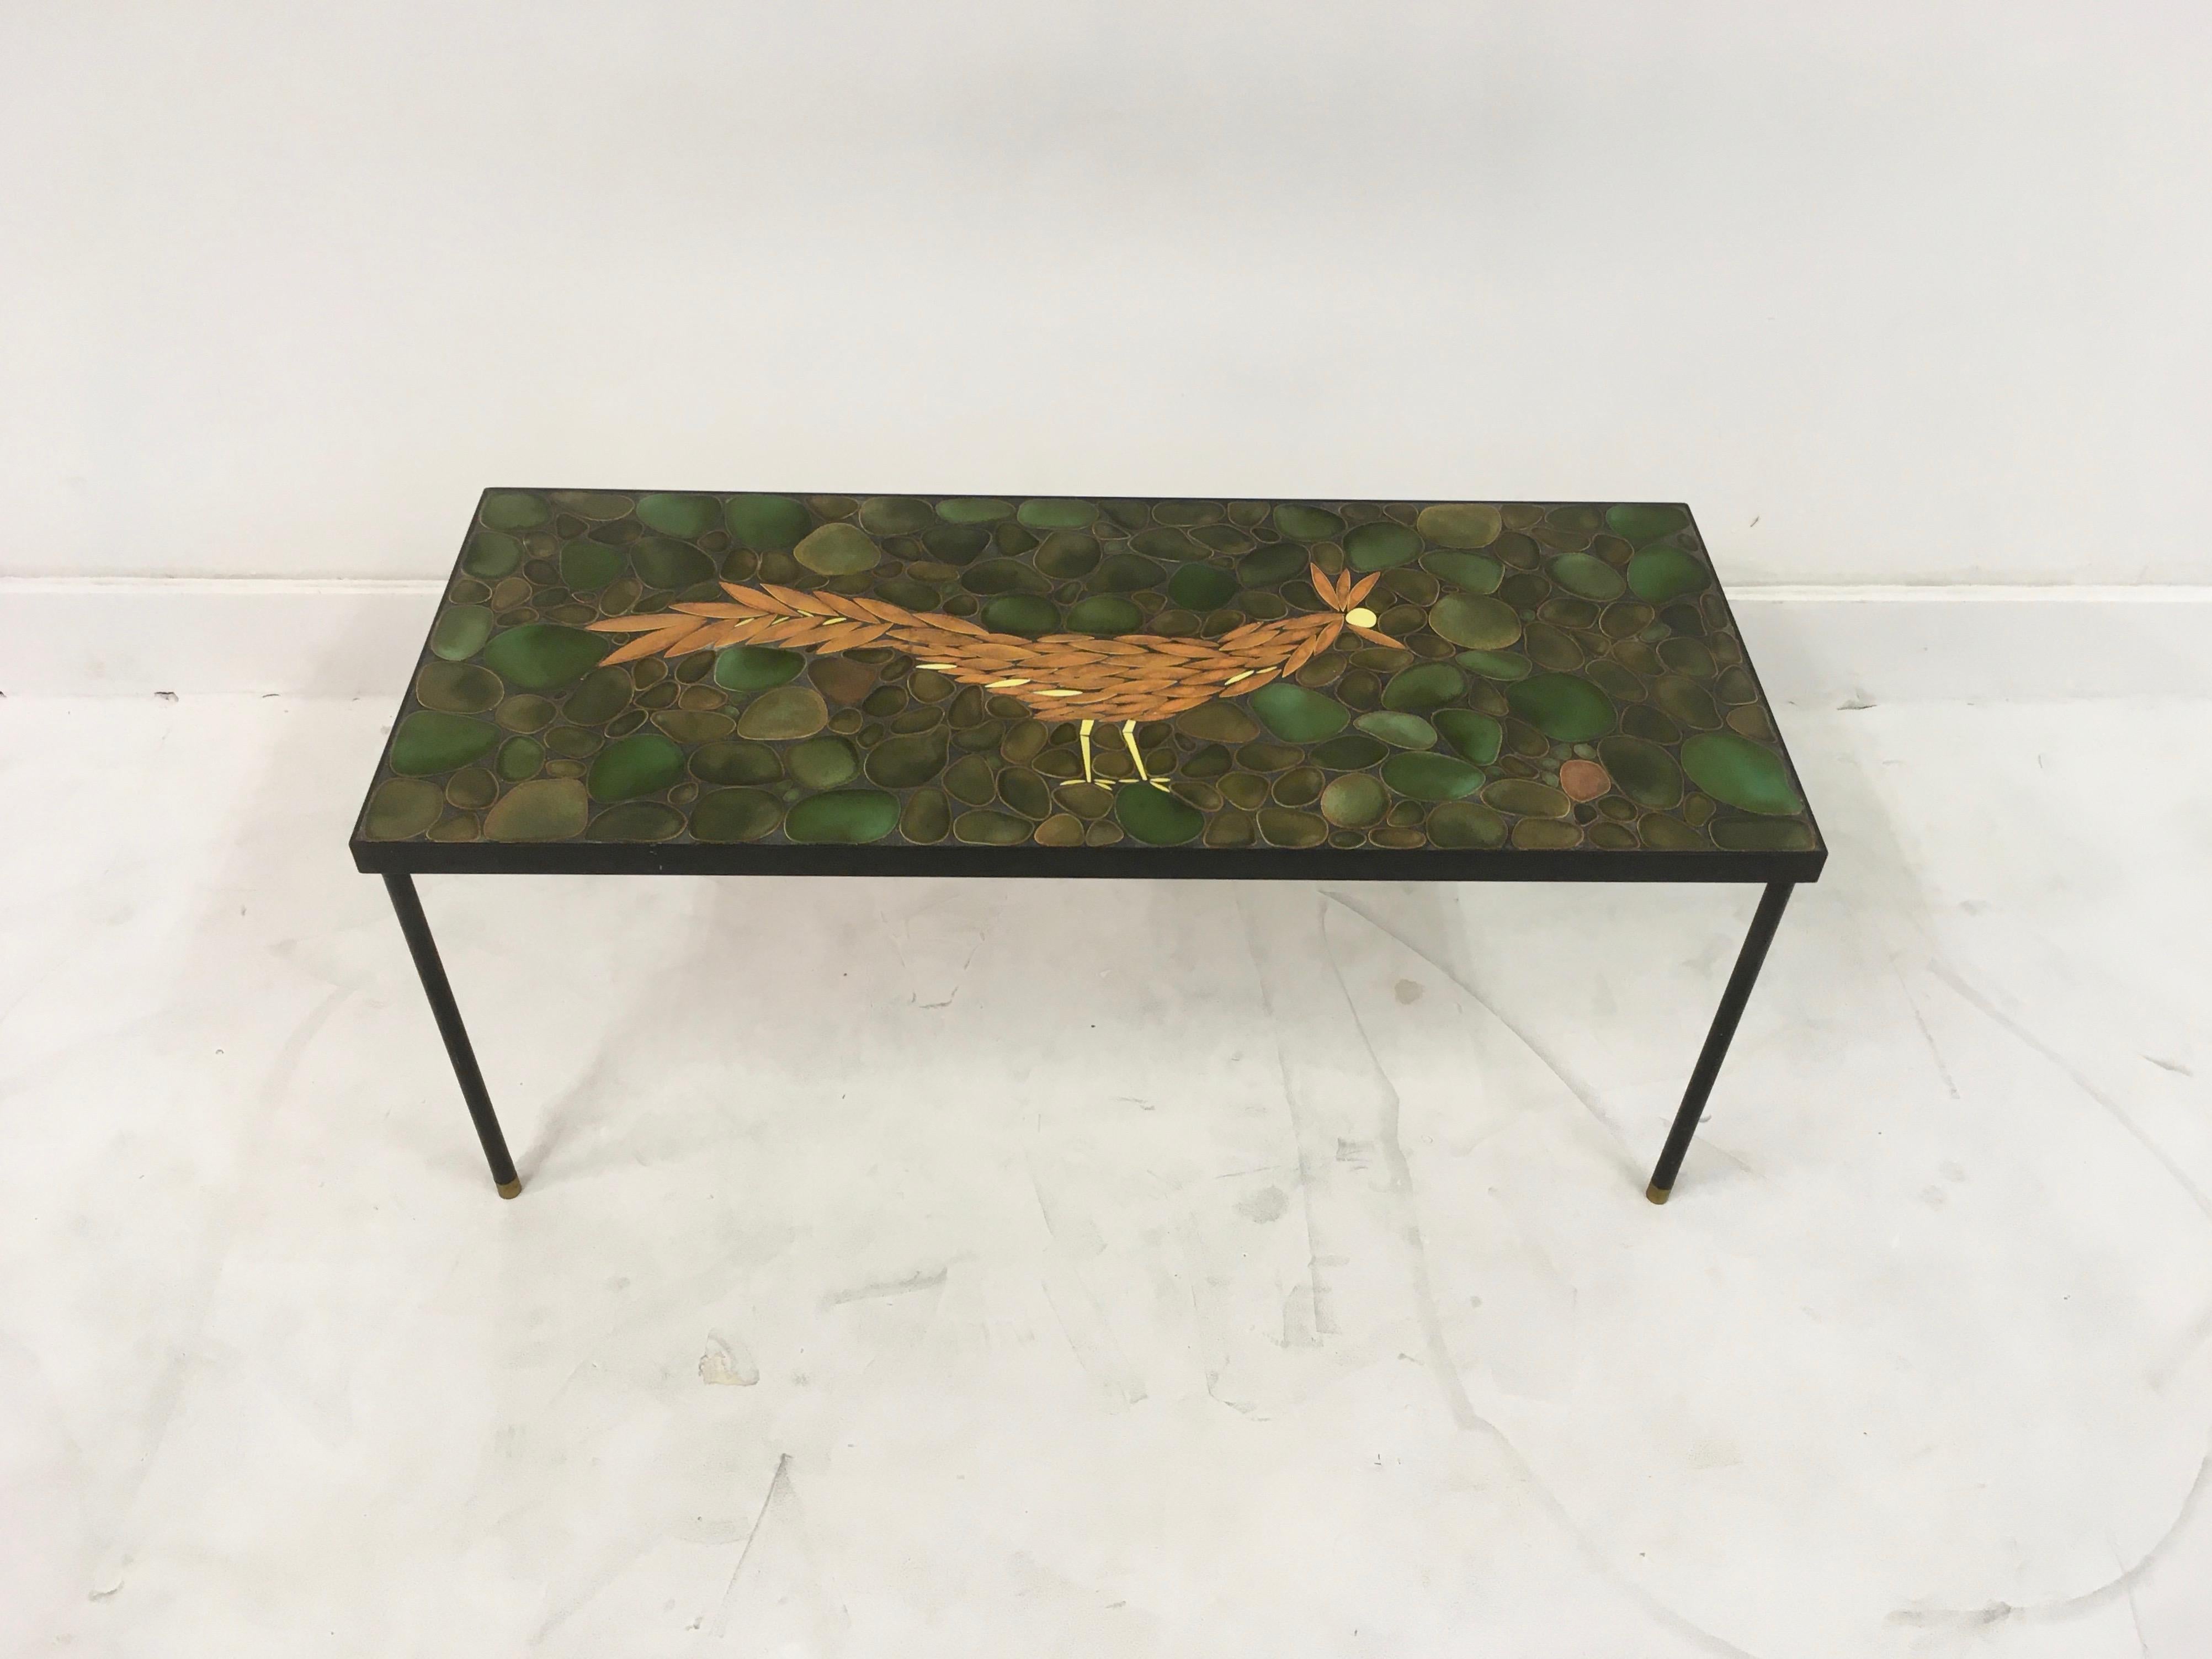 Ceramic topped coffee table

Black painted steel base

Brass feet

1960s-1970s.